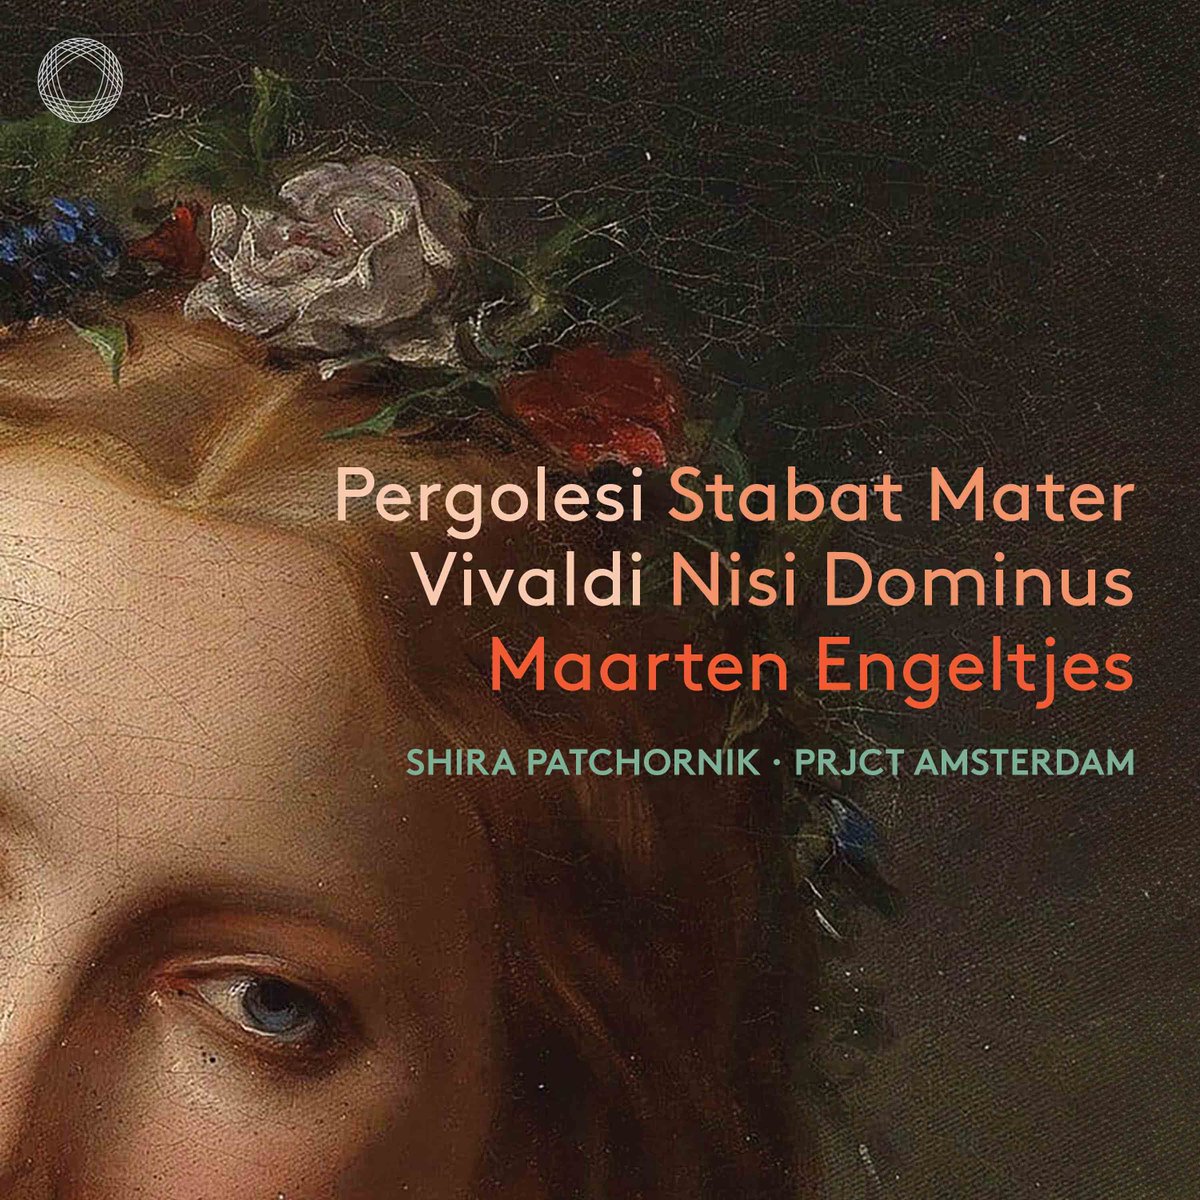 .@prjctamsterdam and its artistic director @MEngeltjes present two of the greatest vocal works of the baroque era: Pergolesi’s ‘Stabat Mater’ (featuring soprano Shira Patchornik) and Vivaldi’s ‘Nisi Dominus’. RELEASED TODAY, LISTEN NOW: 🎶lnk.to/PergolesiVival…